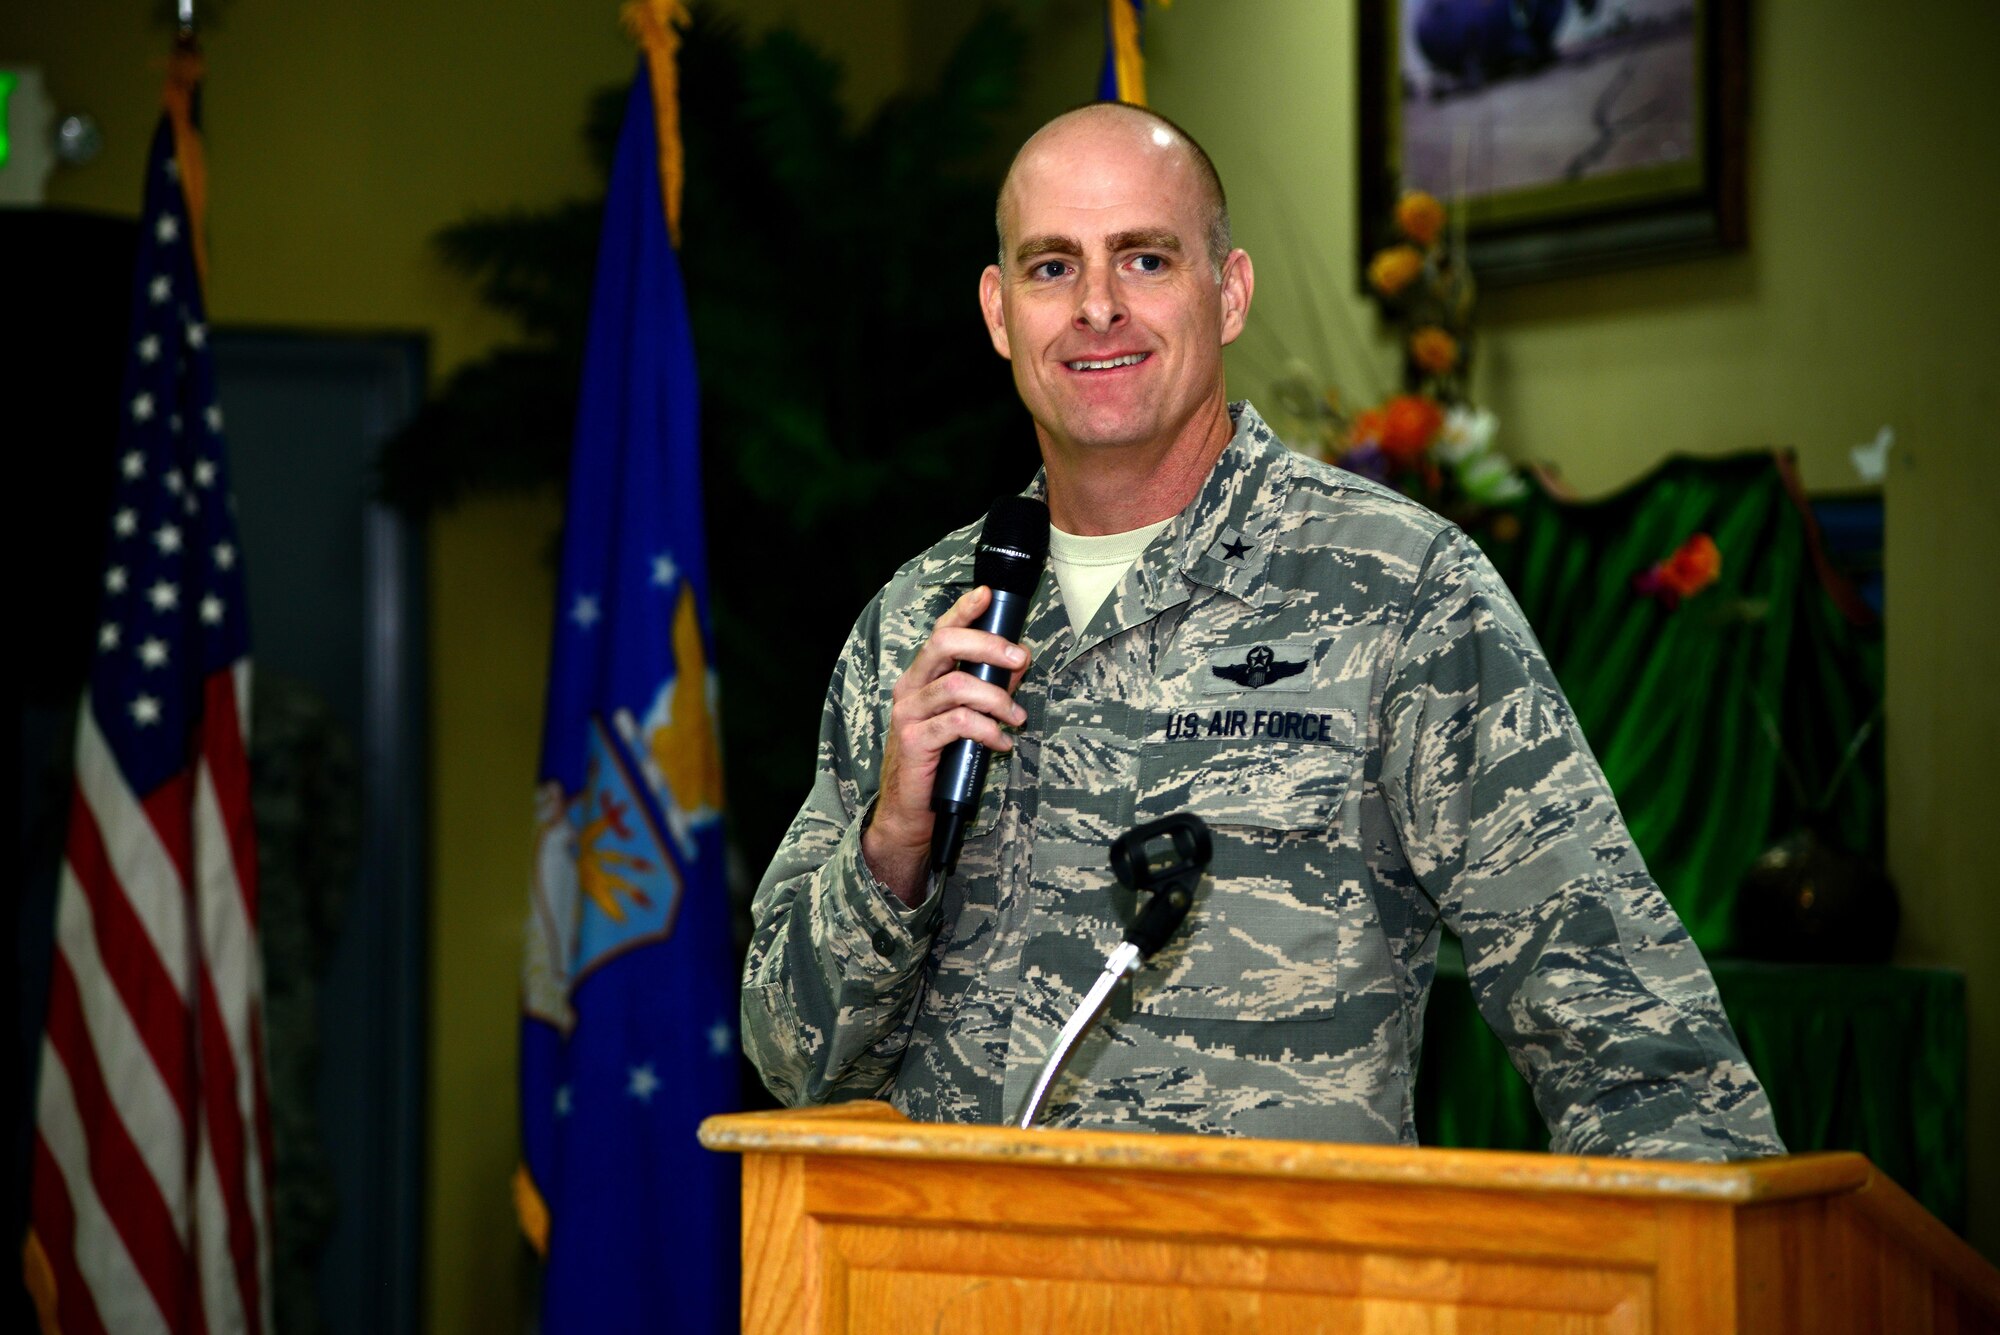 Brig. Gen. Darren James, 379th Air Expeditionary Wing commander, makes opening remarks to begin the cake cutting ceremony Sept. 18, 2015, at Al Udeid Air Base, Qatar. The cake cutting ceremony is traditionally performed by the oldest and youngest Airman. This year marks 68 years of military superiority through air power. (U.S. Air Force photo by Tech. Sgt. Rasheen Douglas)